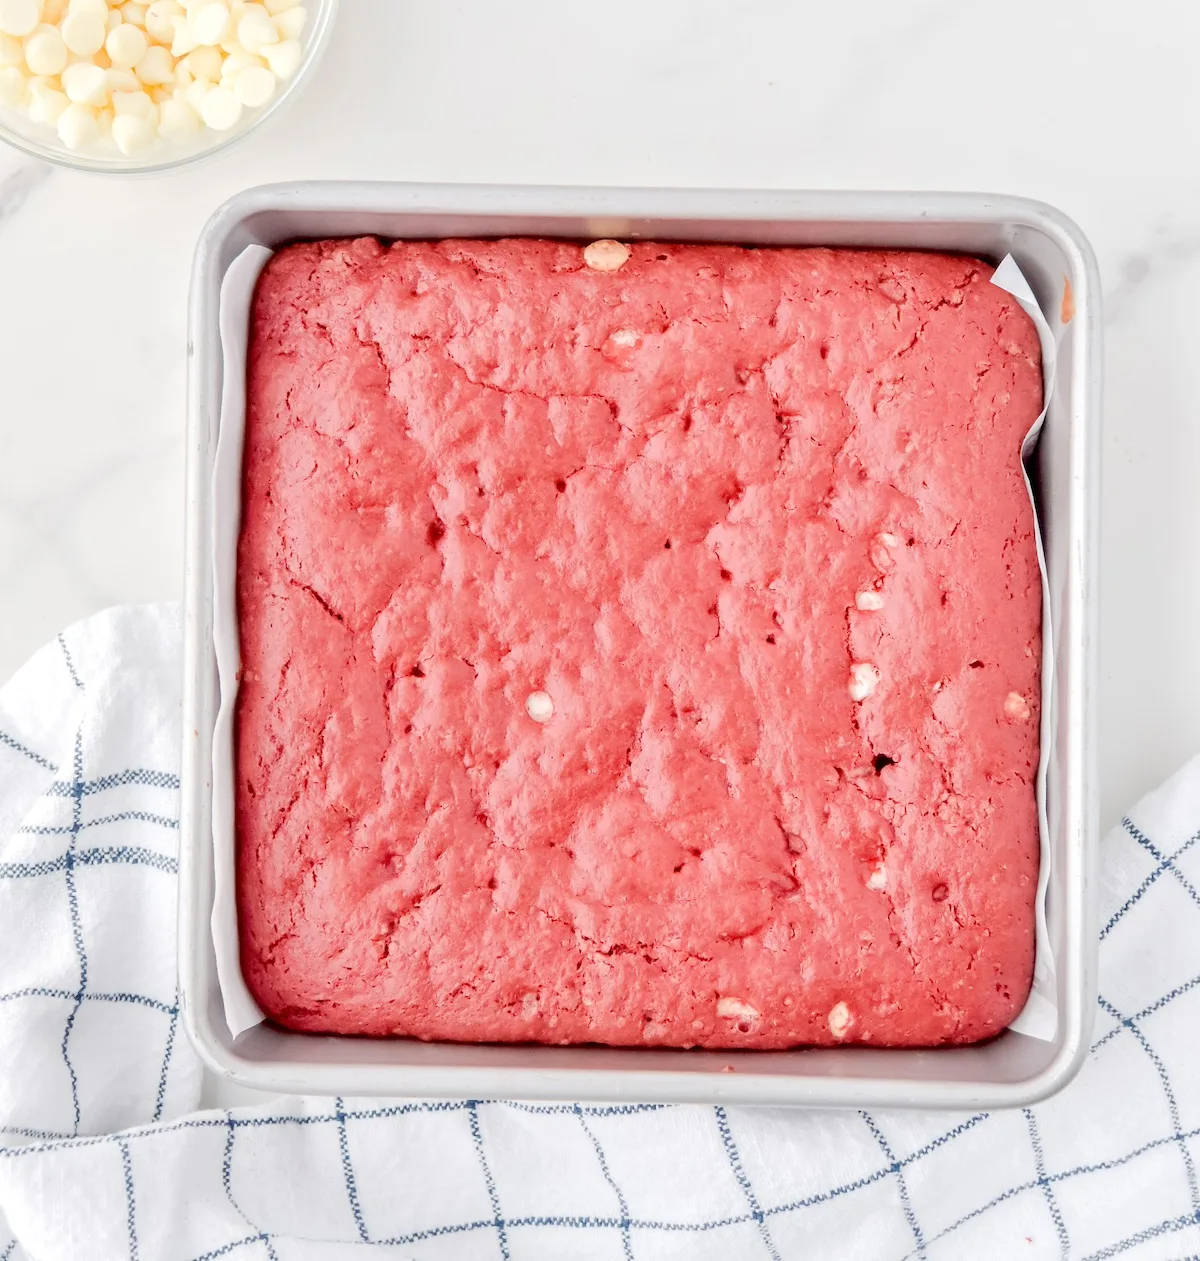 Red velvet brownies with white chocolate chips baked in a pan